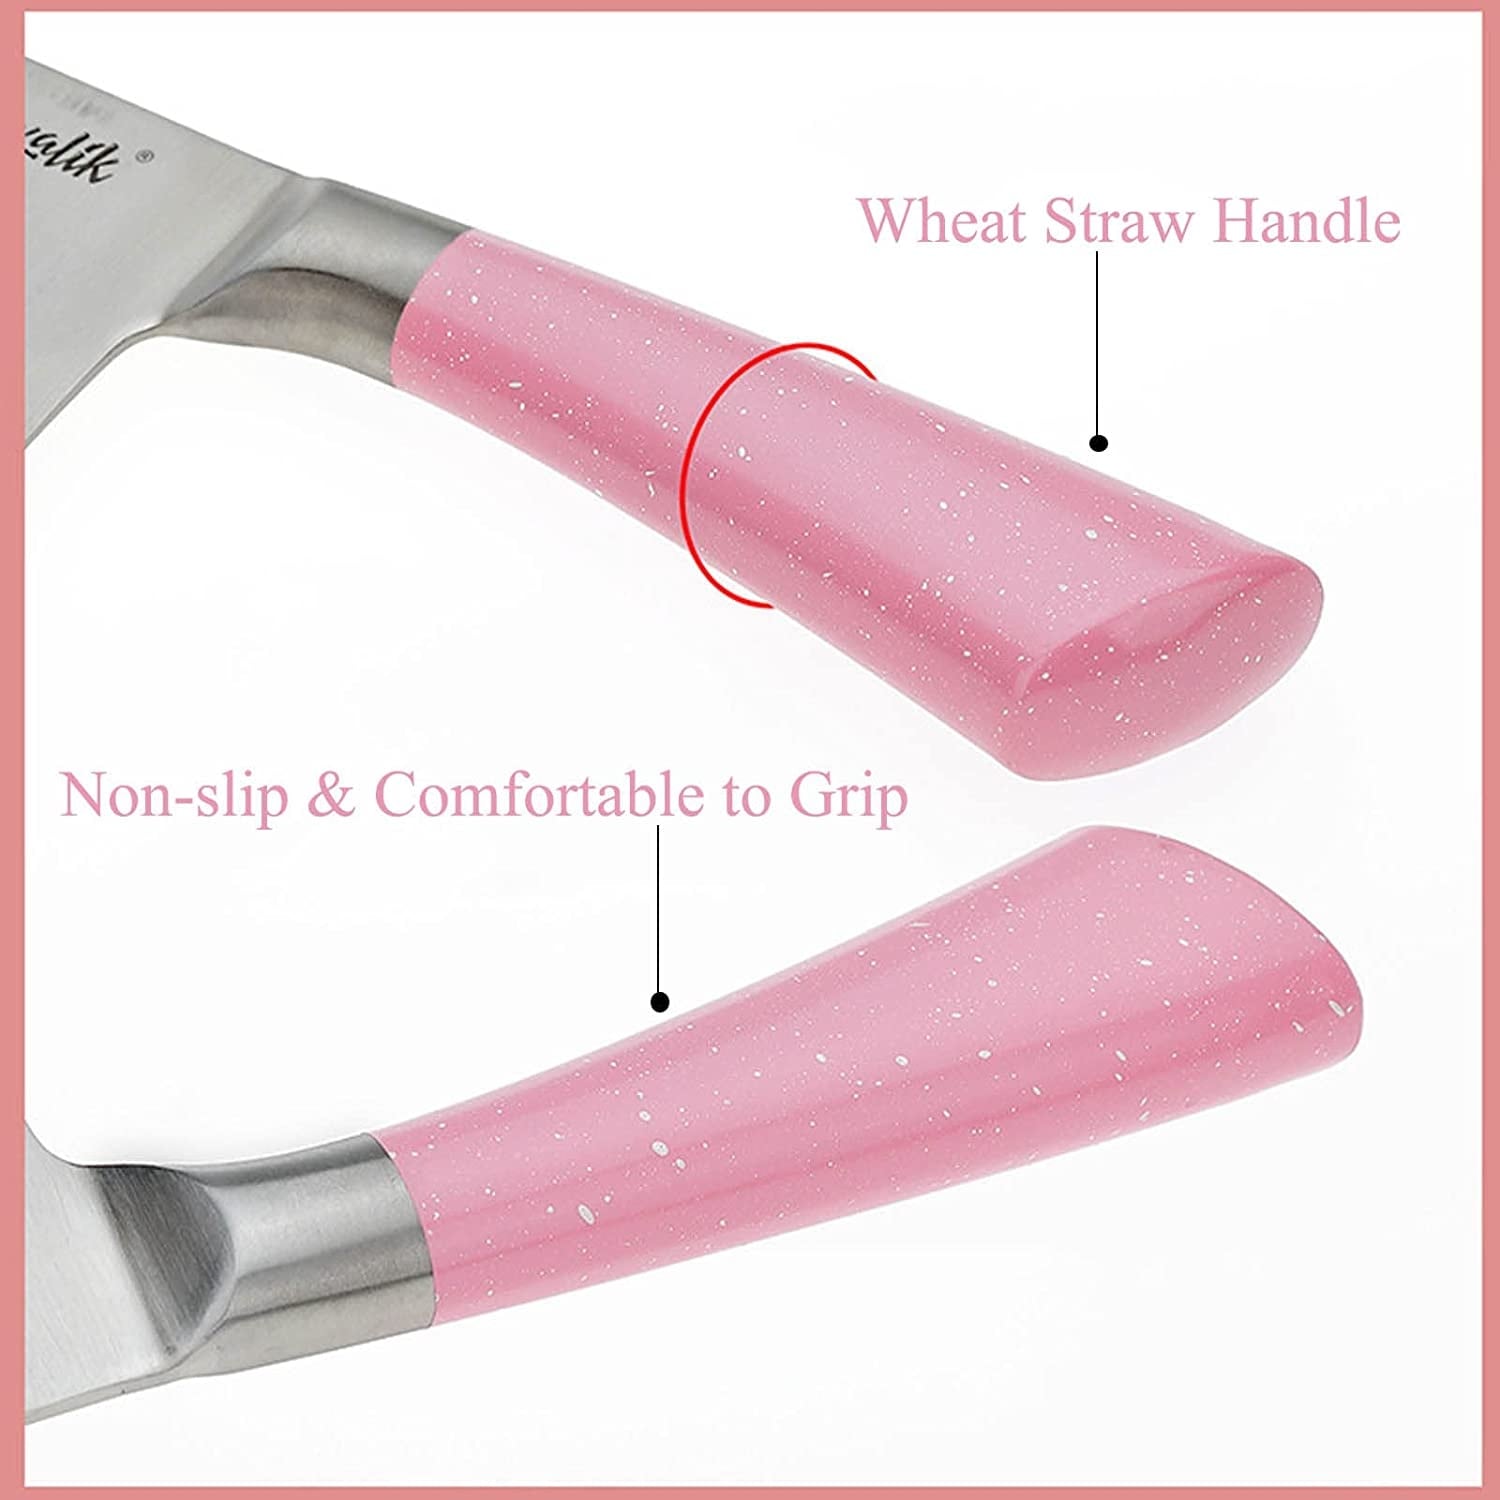 Kitchen Knife Set, Retrosohoo 9 PC Pink Wheat Straw Sharp Cooking Knife Set  with Acrylic Stand, Stainless Steel Non-stick Chef with Comfortable Handle  for Slicing Cutting Peeling Chopping (Pink)